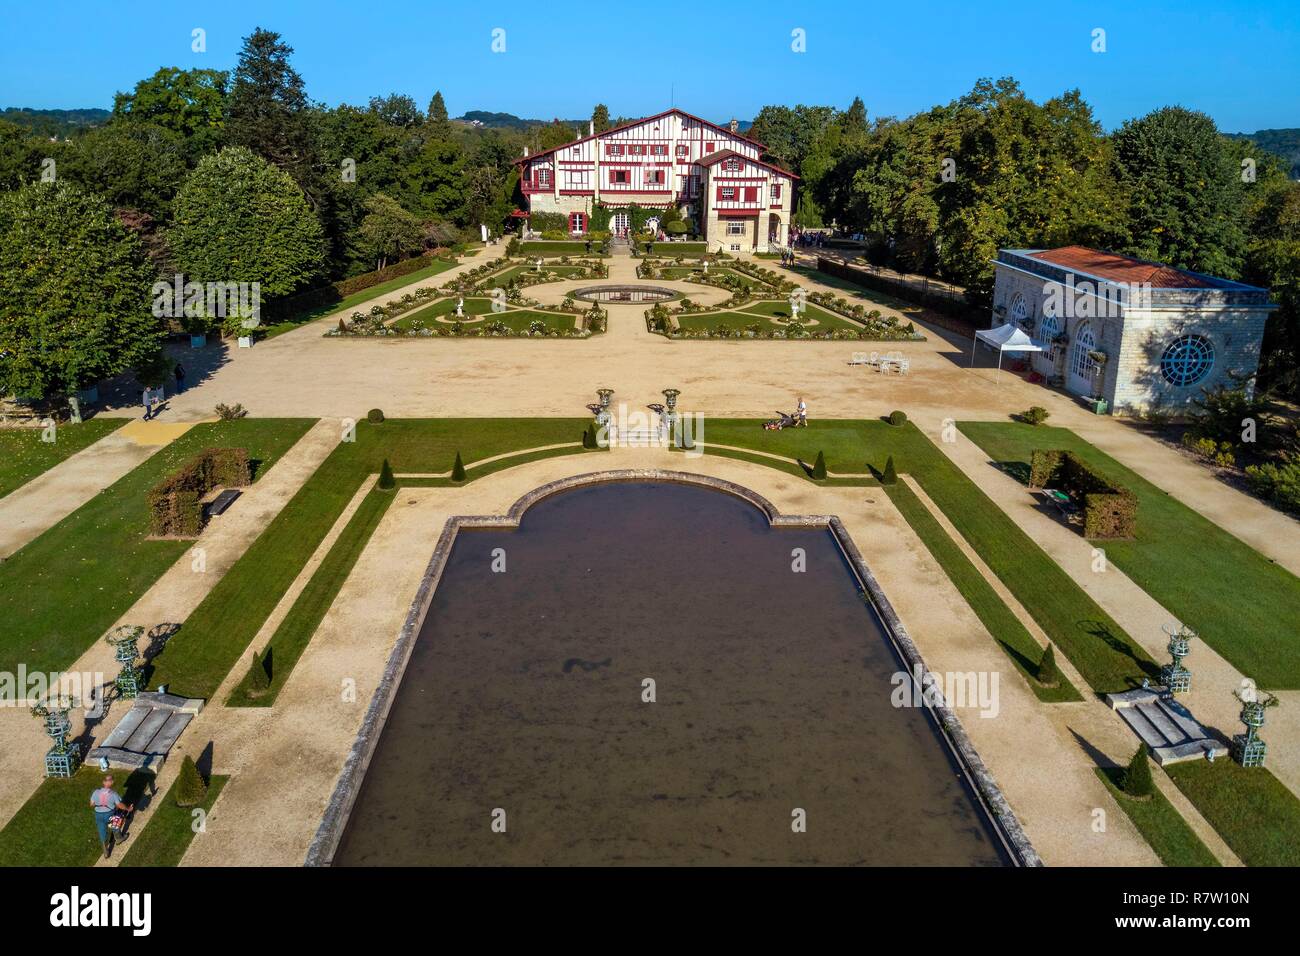 France, Pyrenees Atlantiques, Basque Country, Cambo les Bains, the Villa Arnaga and its French-style garden, the French author Edmond Rostand's house of neo-basque style and museum (aerial view) Stock Photo